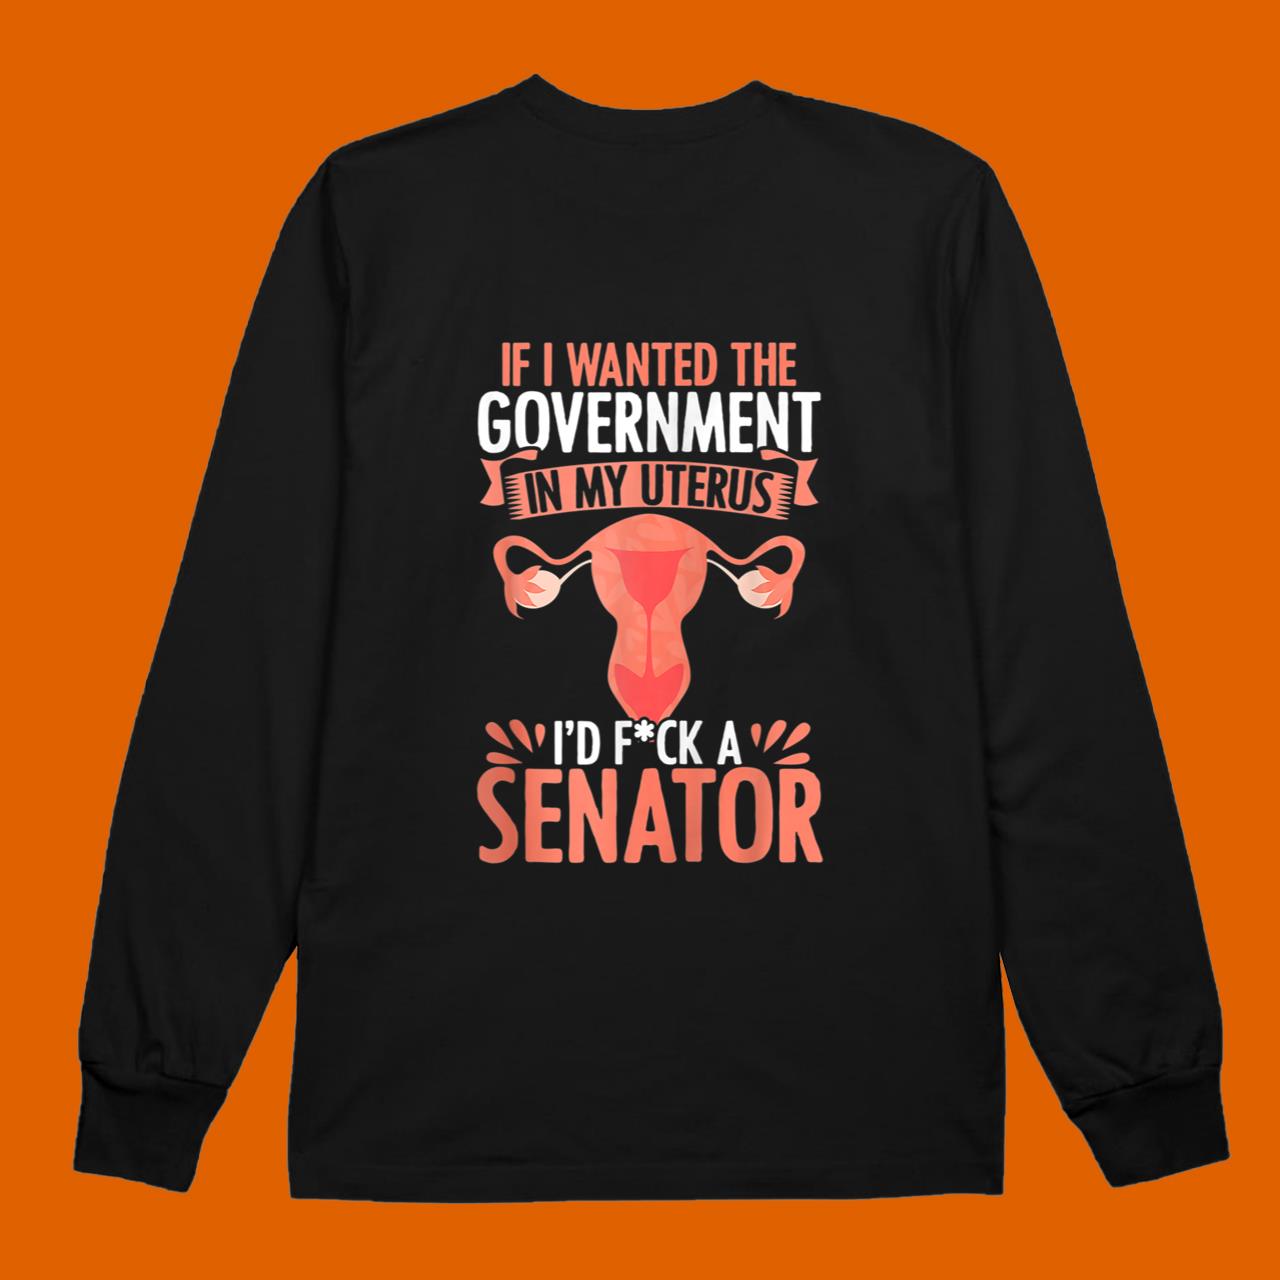 Government In My Uterus Feminist Reproductive Women Rights T-Shirt